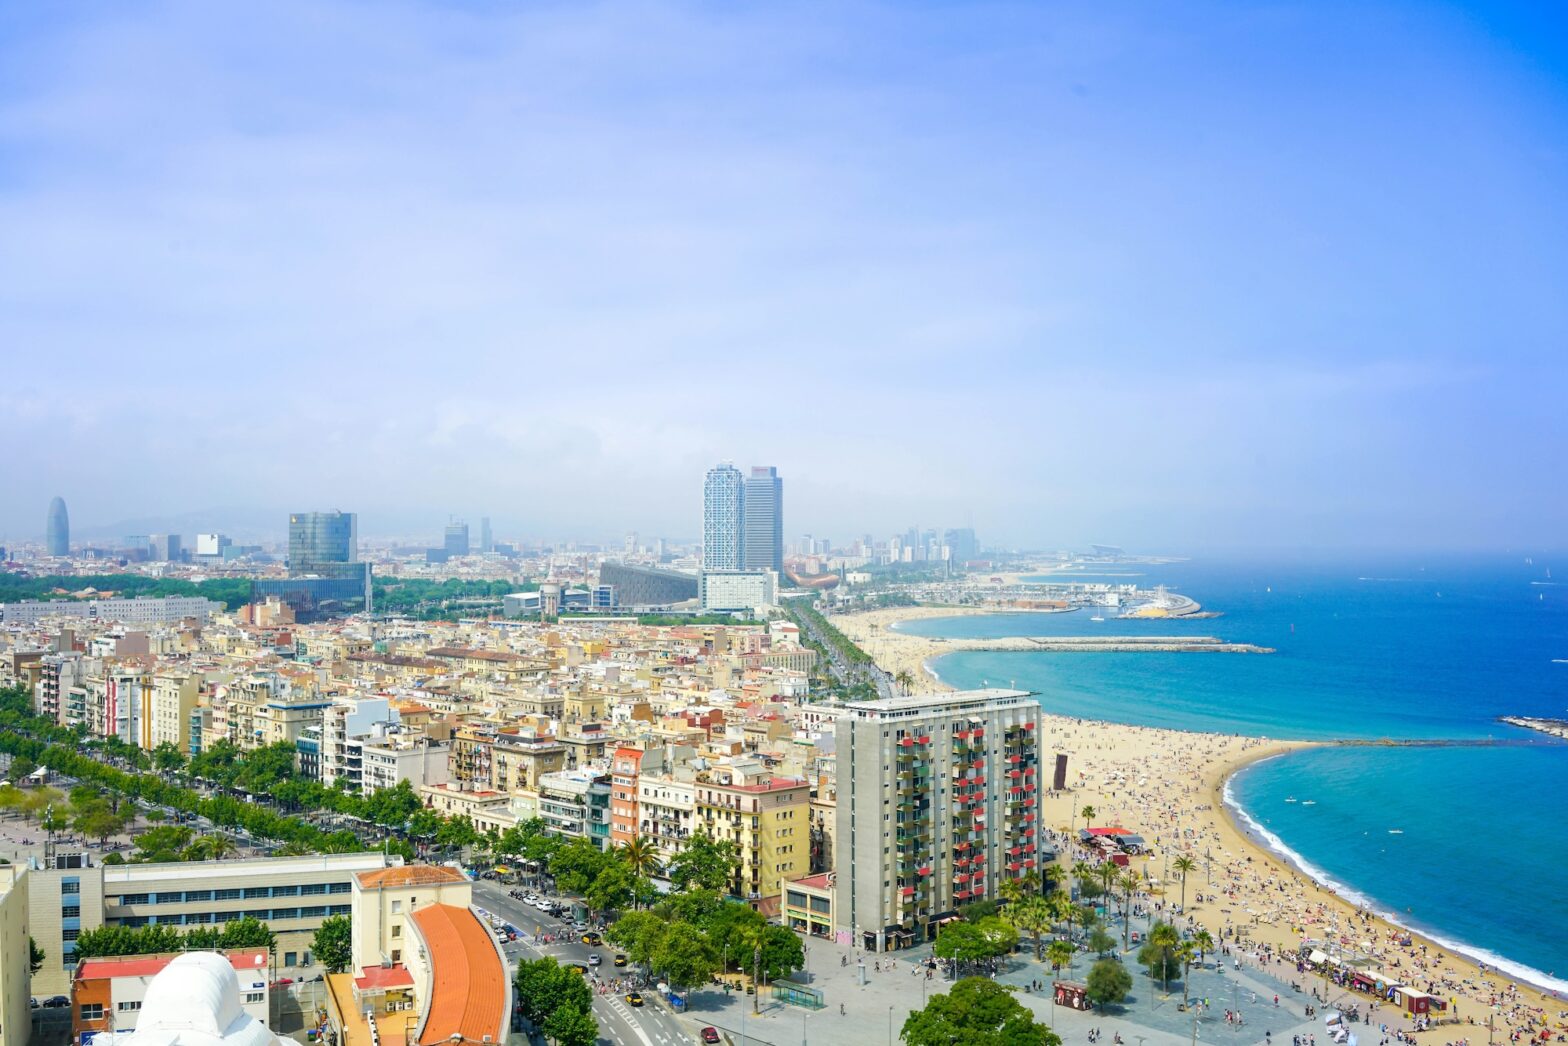 10 Things To Do In Barcelona For $25 Or Less